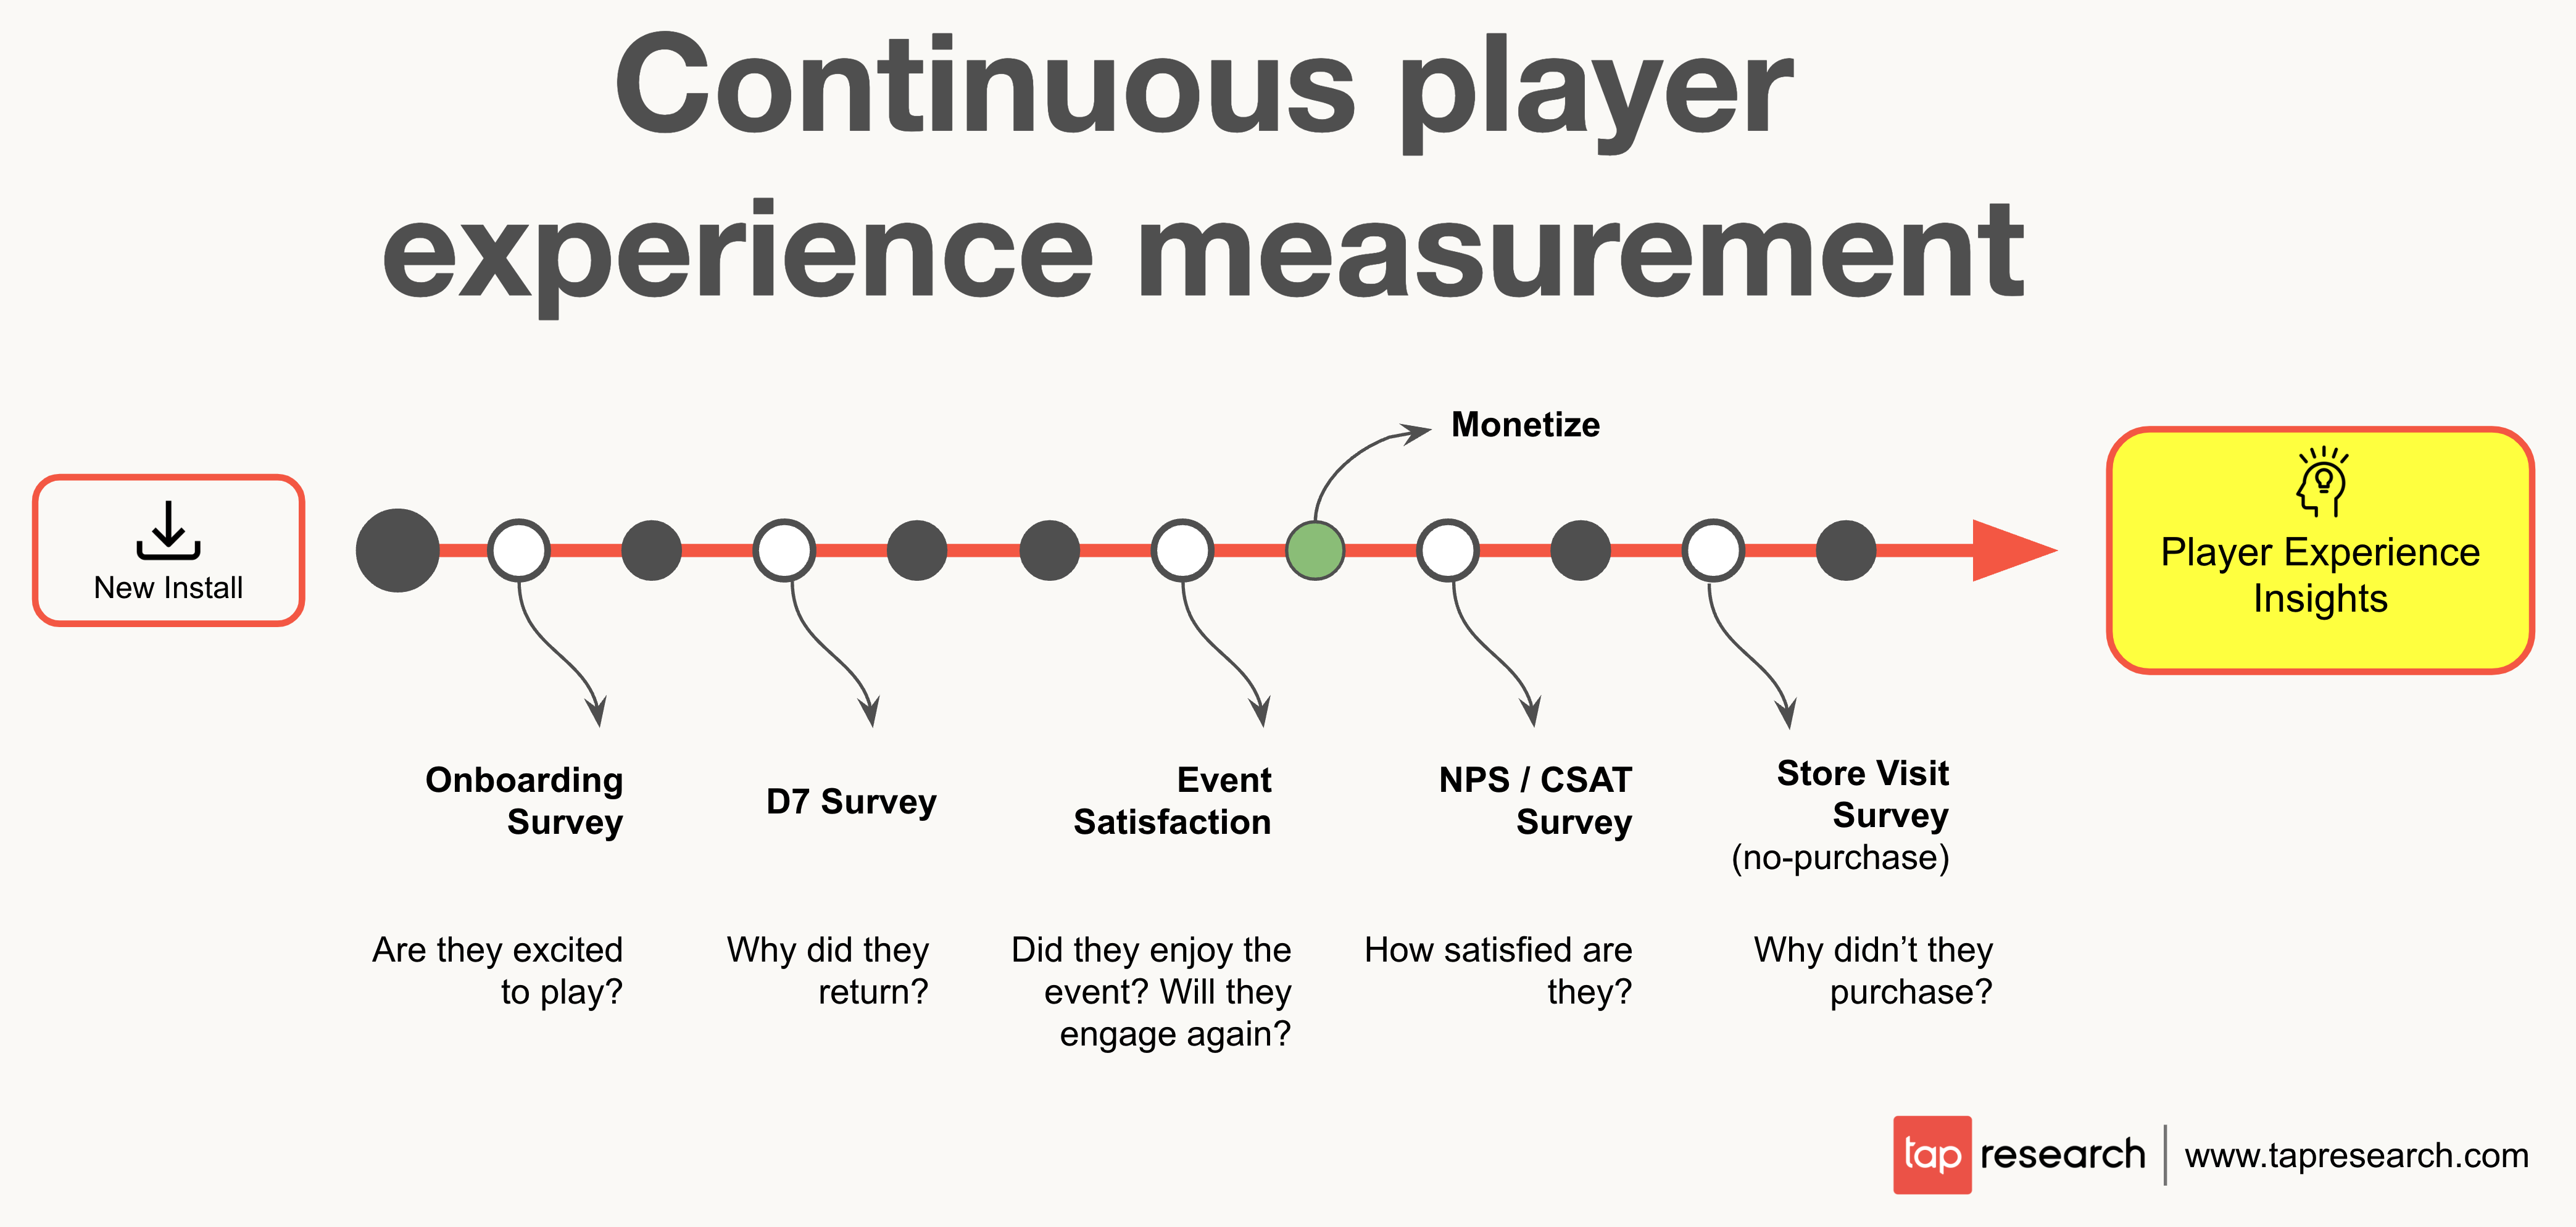 Player Experience Insights